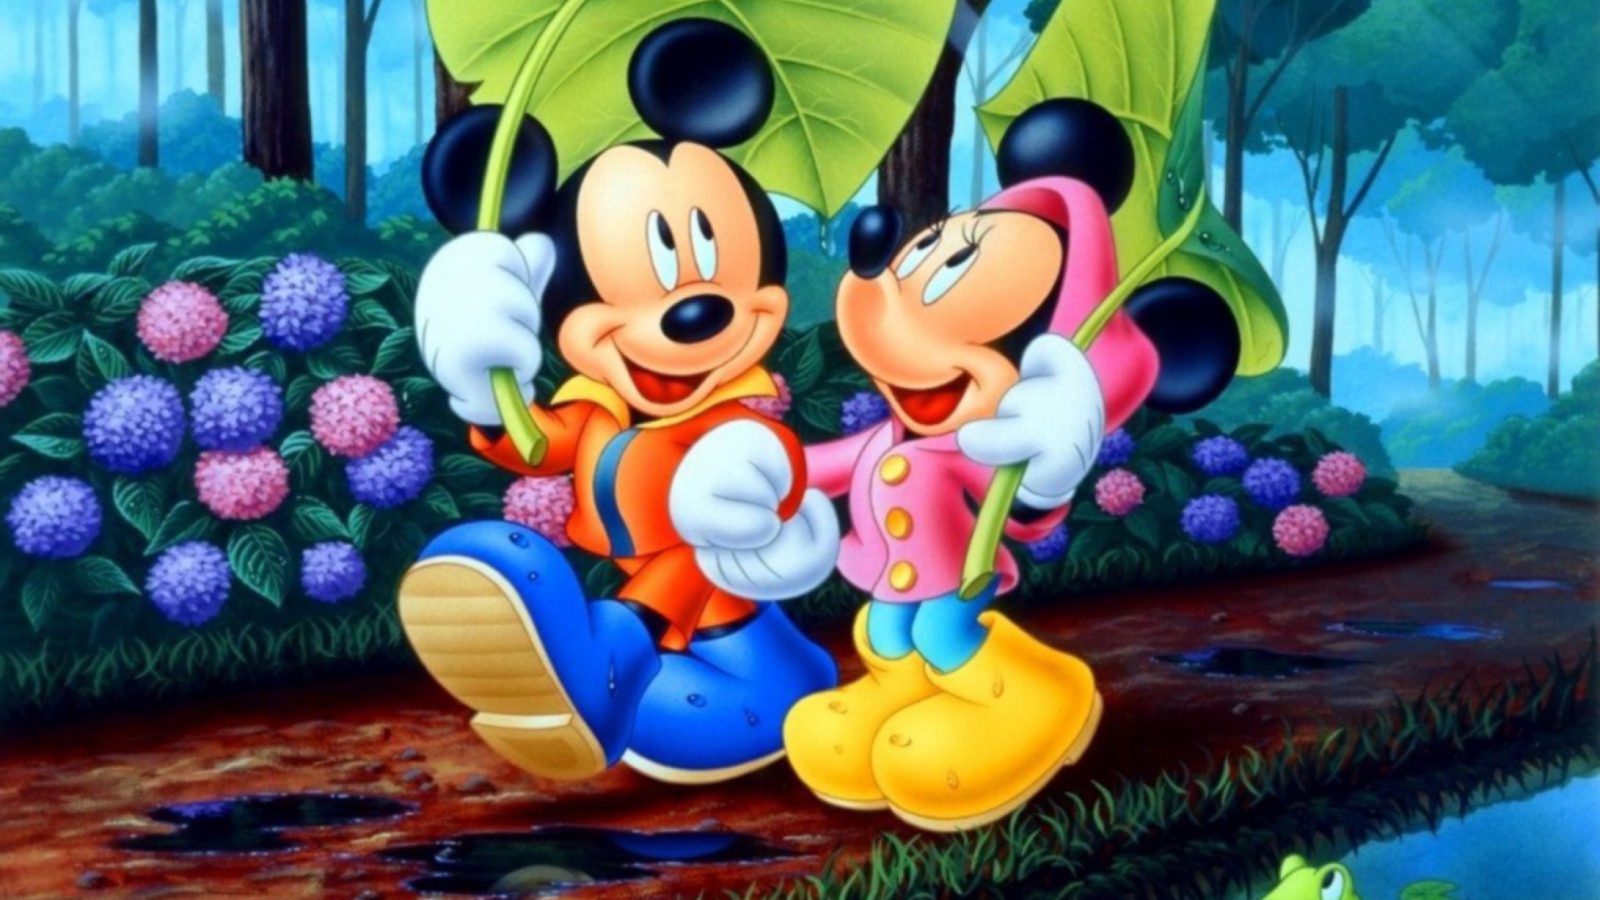 Mickey And Minnie Mouse wallpaper 1600x900